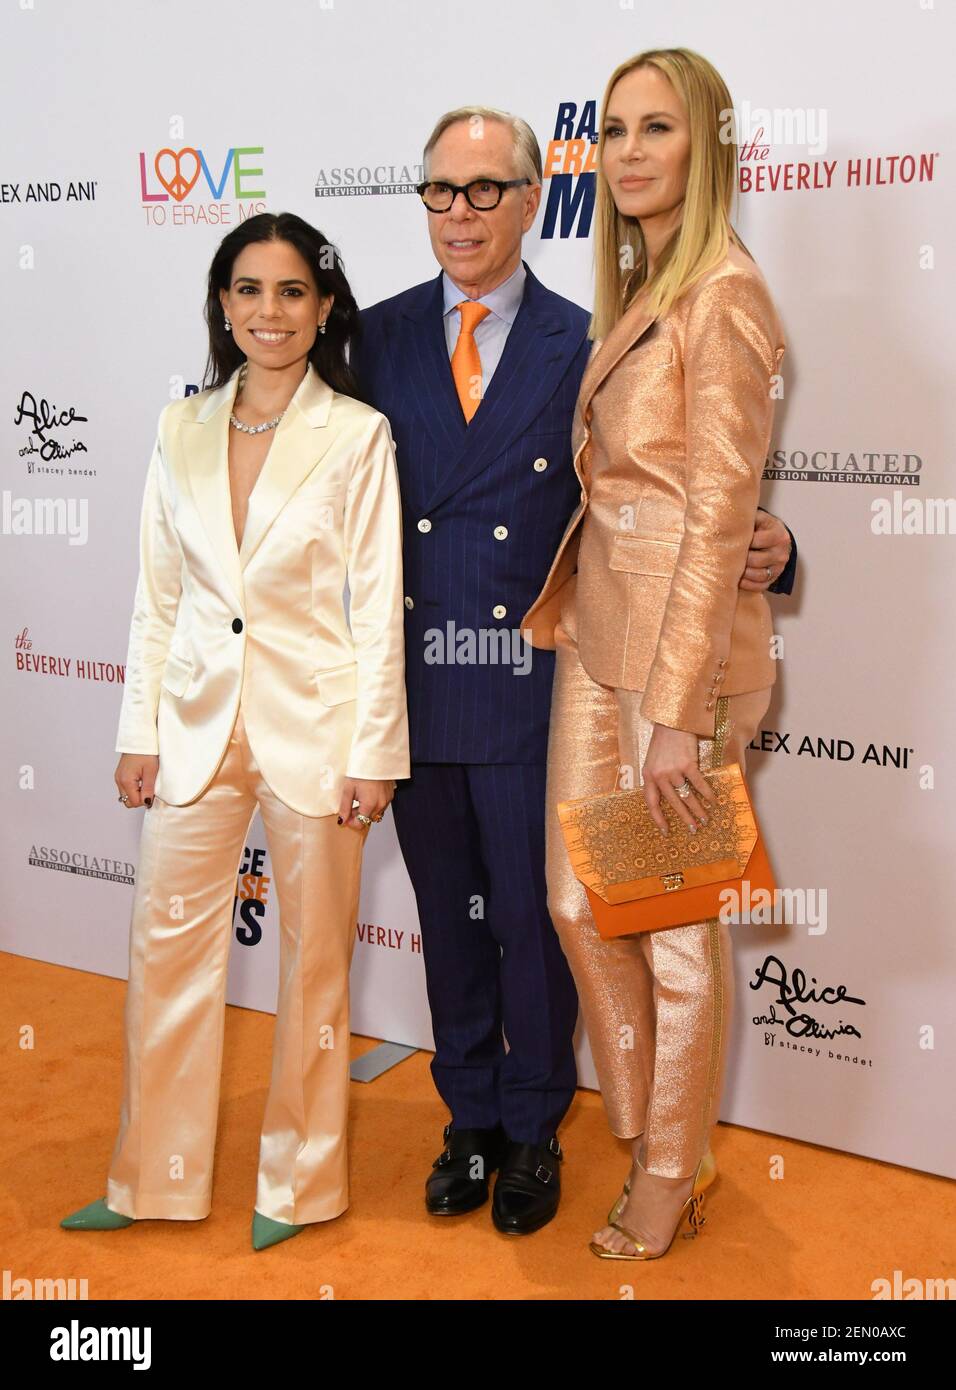 Ally Hilfiger, Tommy Hilfiger, Susie Hilfiger. 26th Annual Race to Erase MS  Gala held at the Beverly Hilton Hotel. Photo Credit: Birdie  Thompson/AdMedia/Sipa USA Stock Photo - Alamy